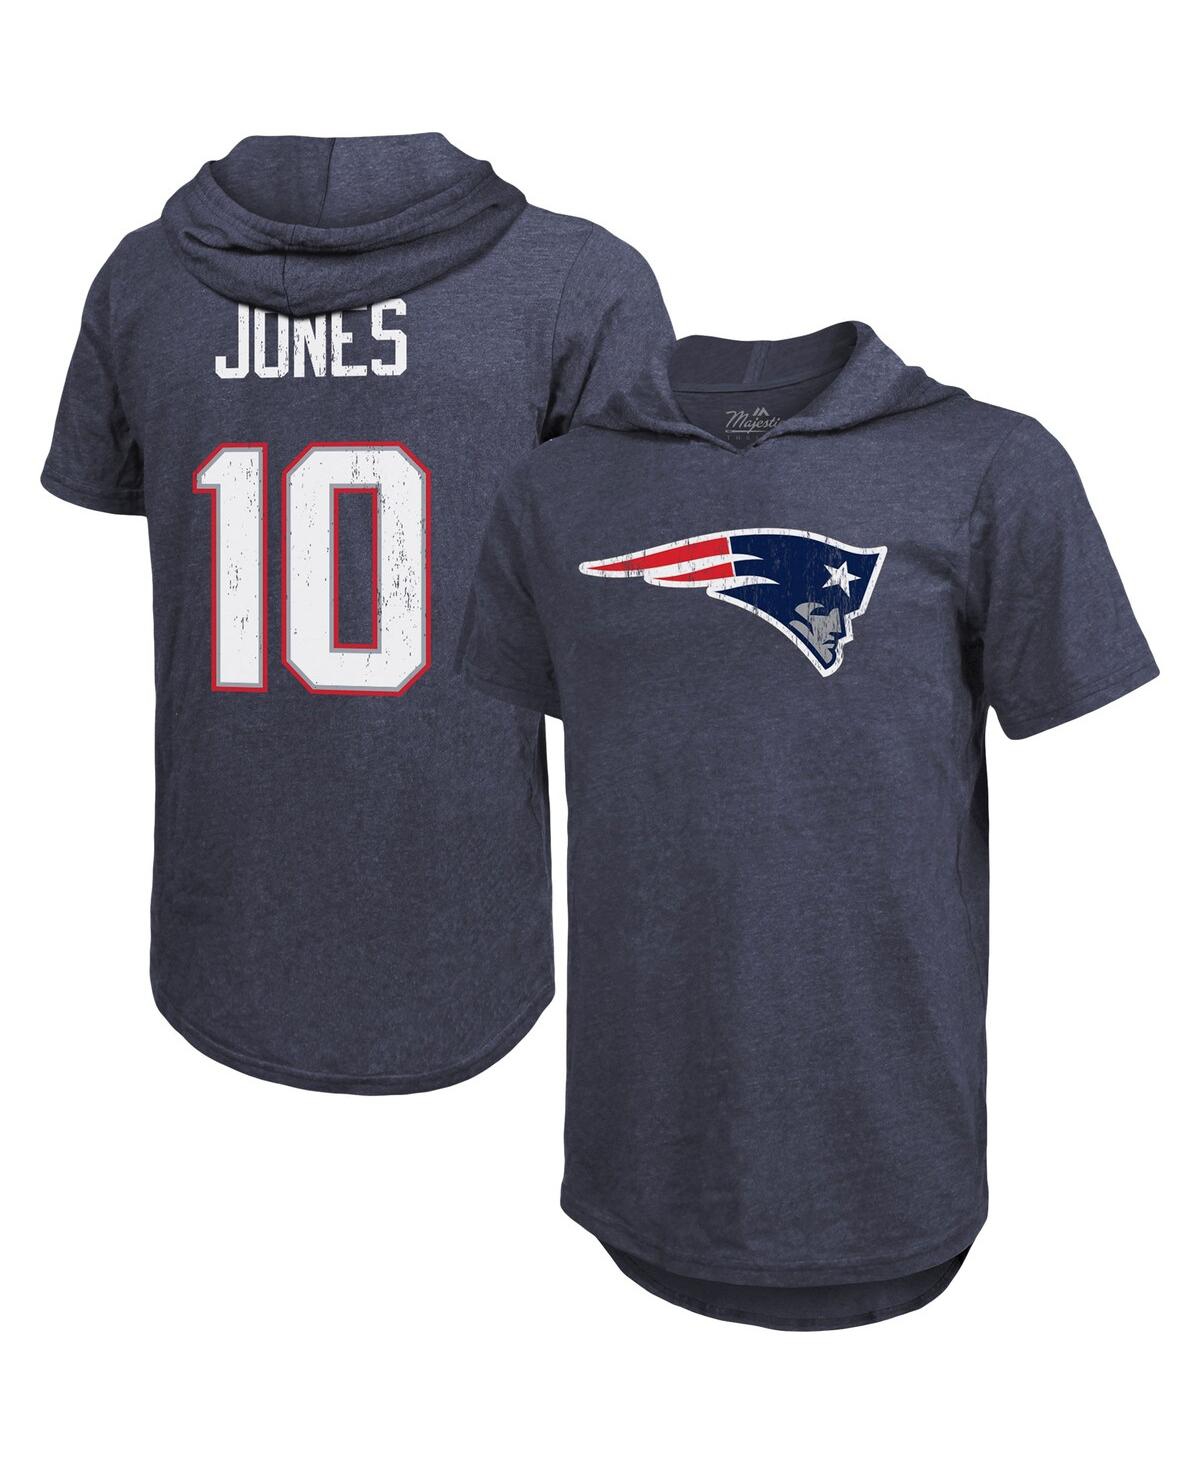 Men's Majestic Threads Mac Jones Navy New England Patriots Player Name and Number Tri-Blend Hoodie T-shirt - Navy